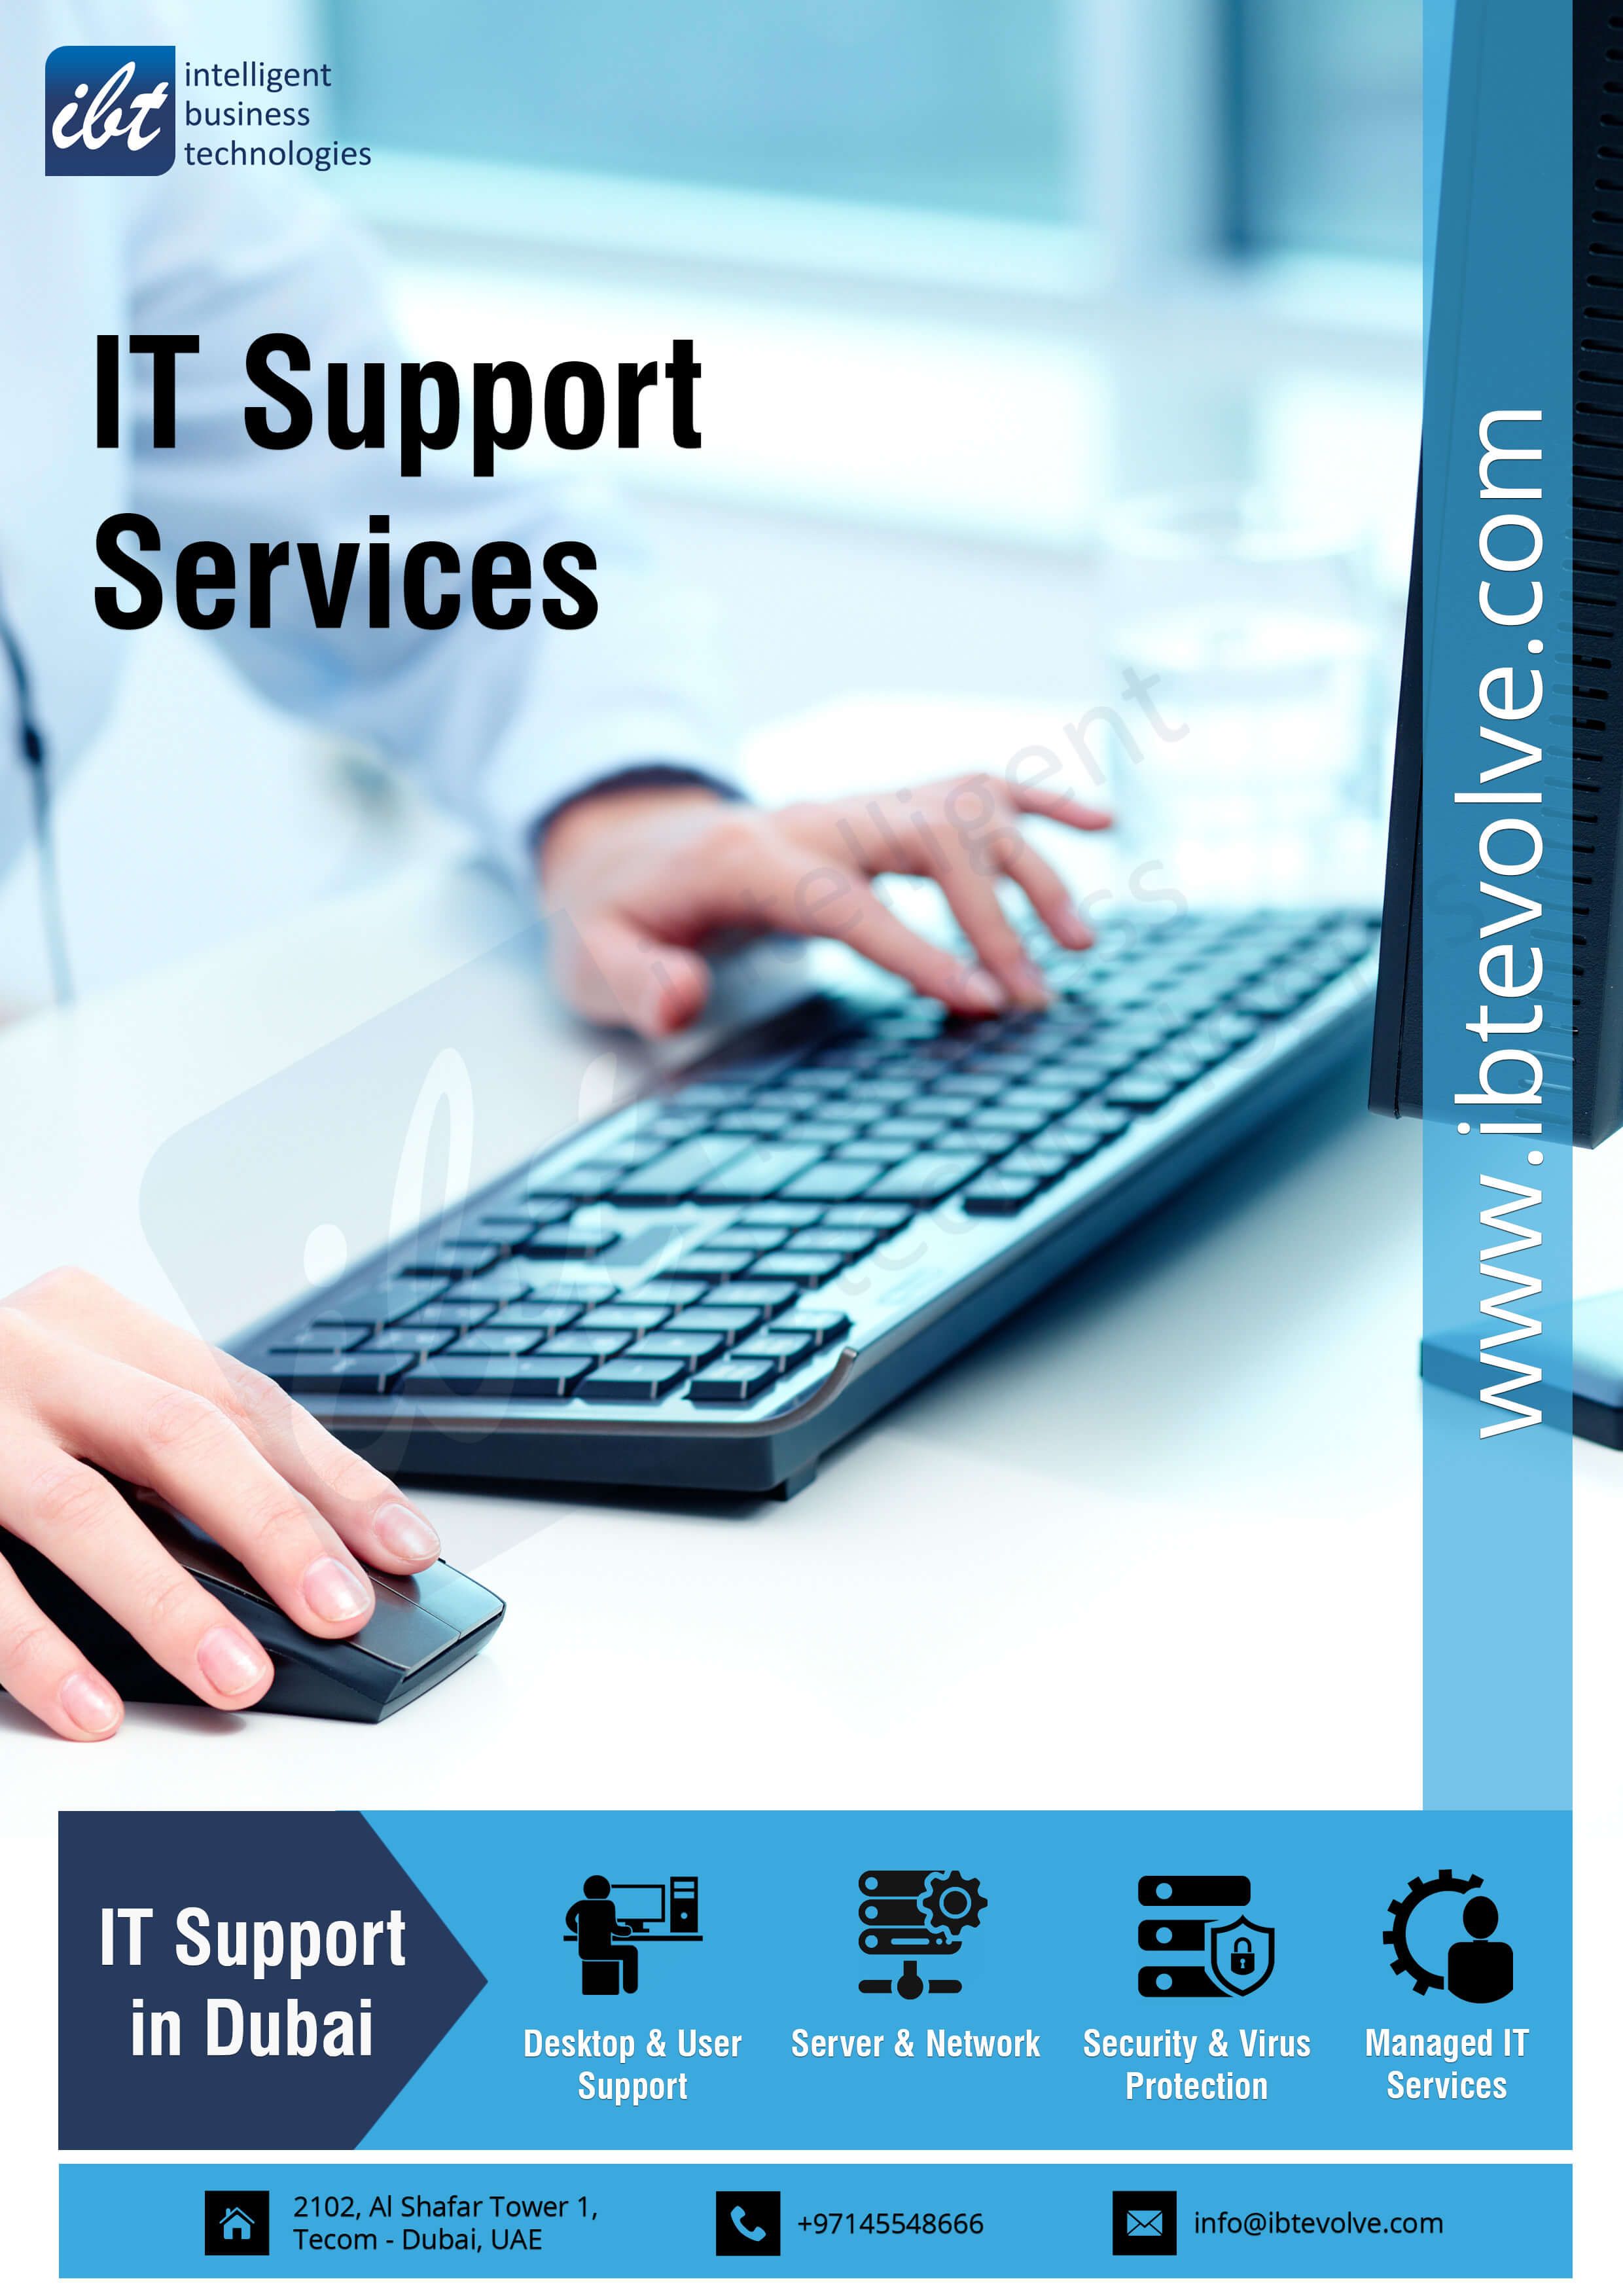 How to find Best IT Support Services in Dubai